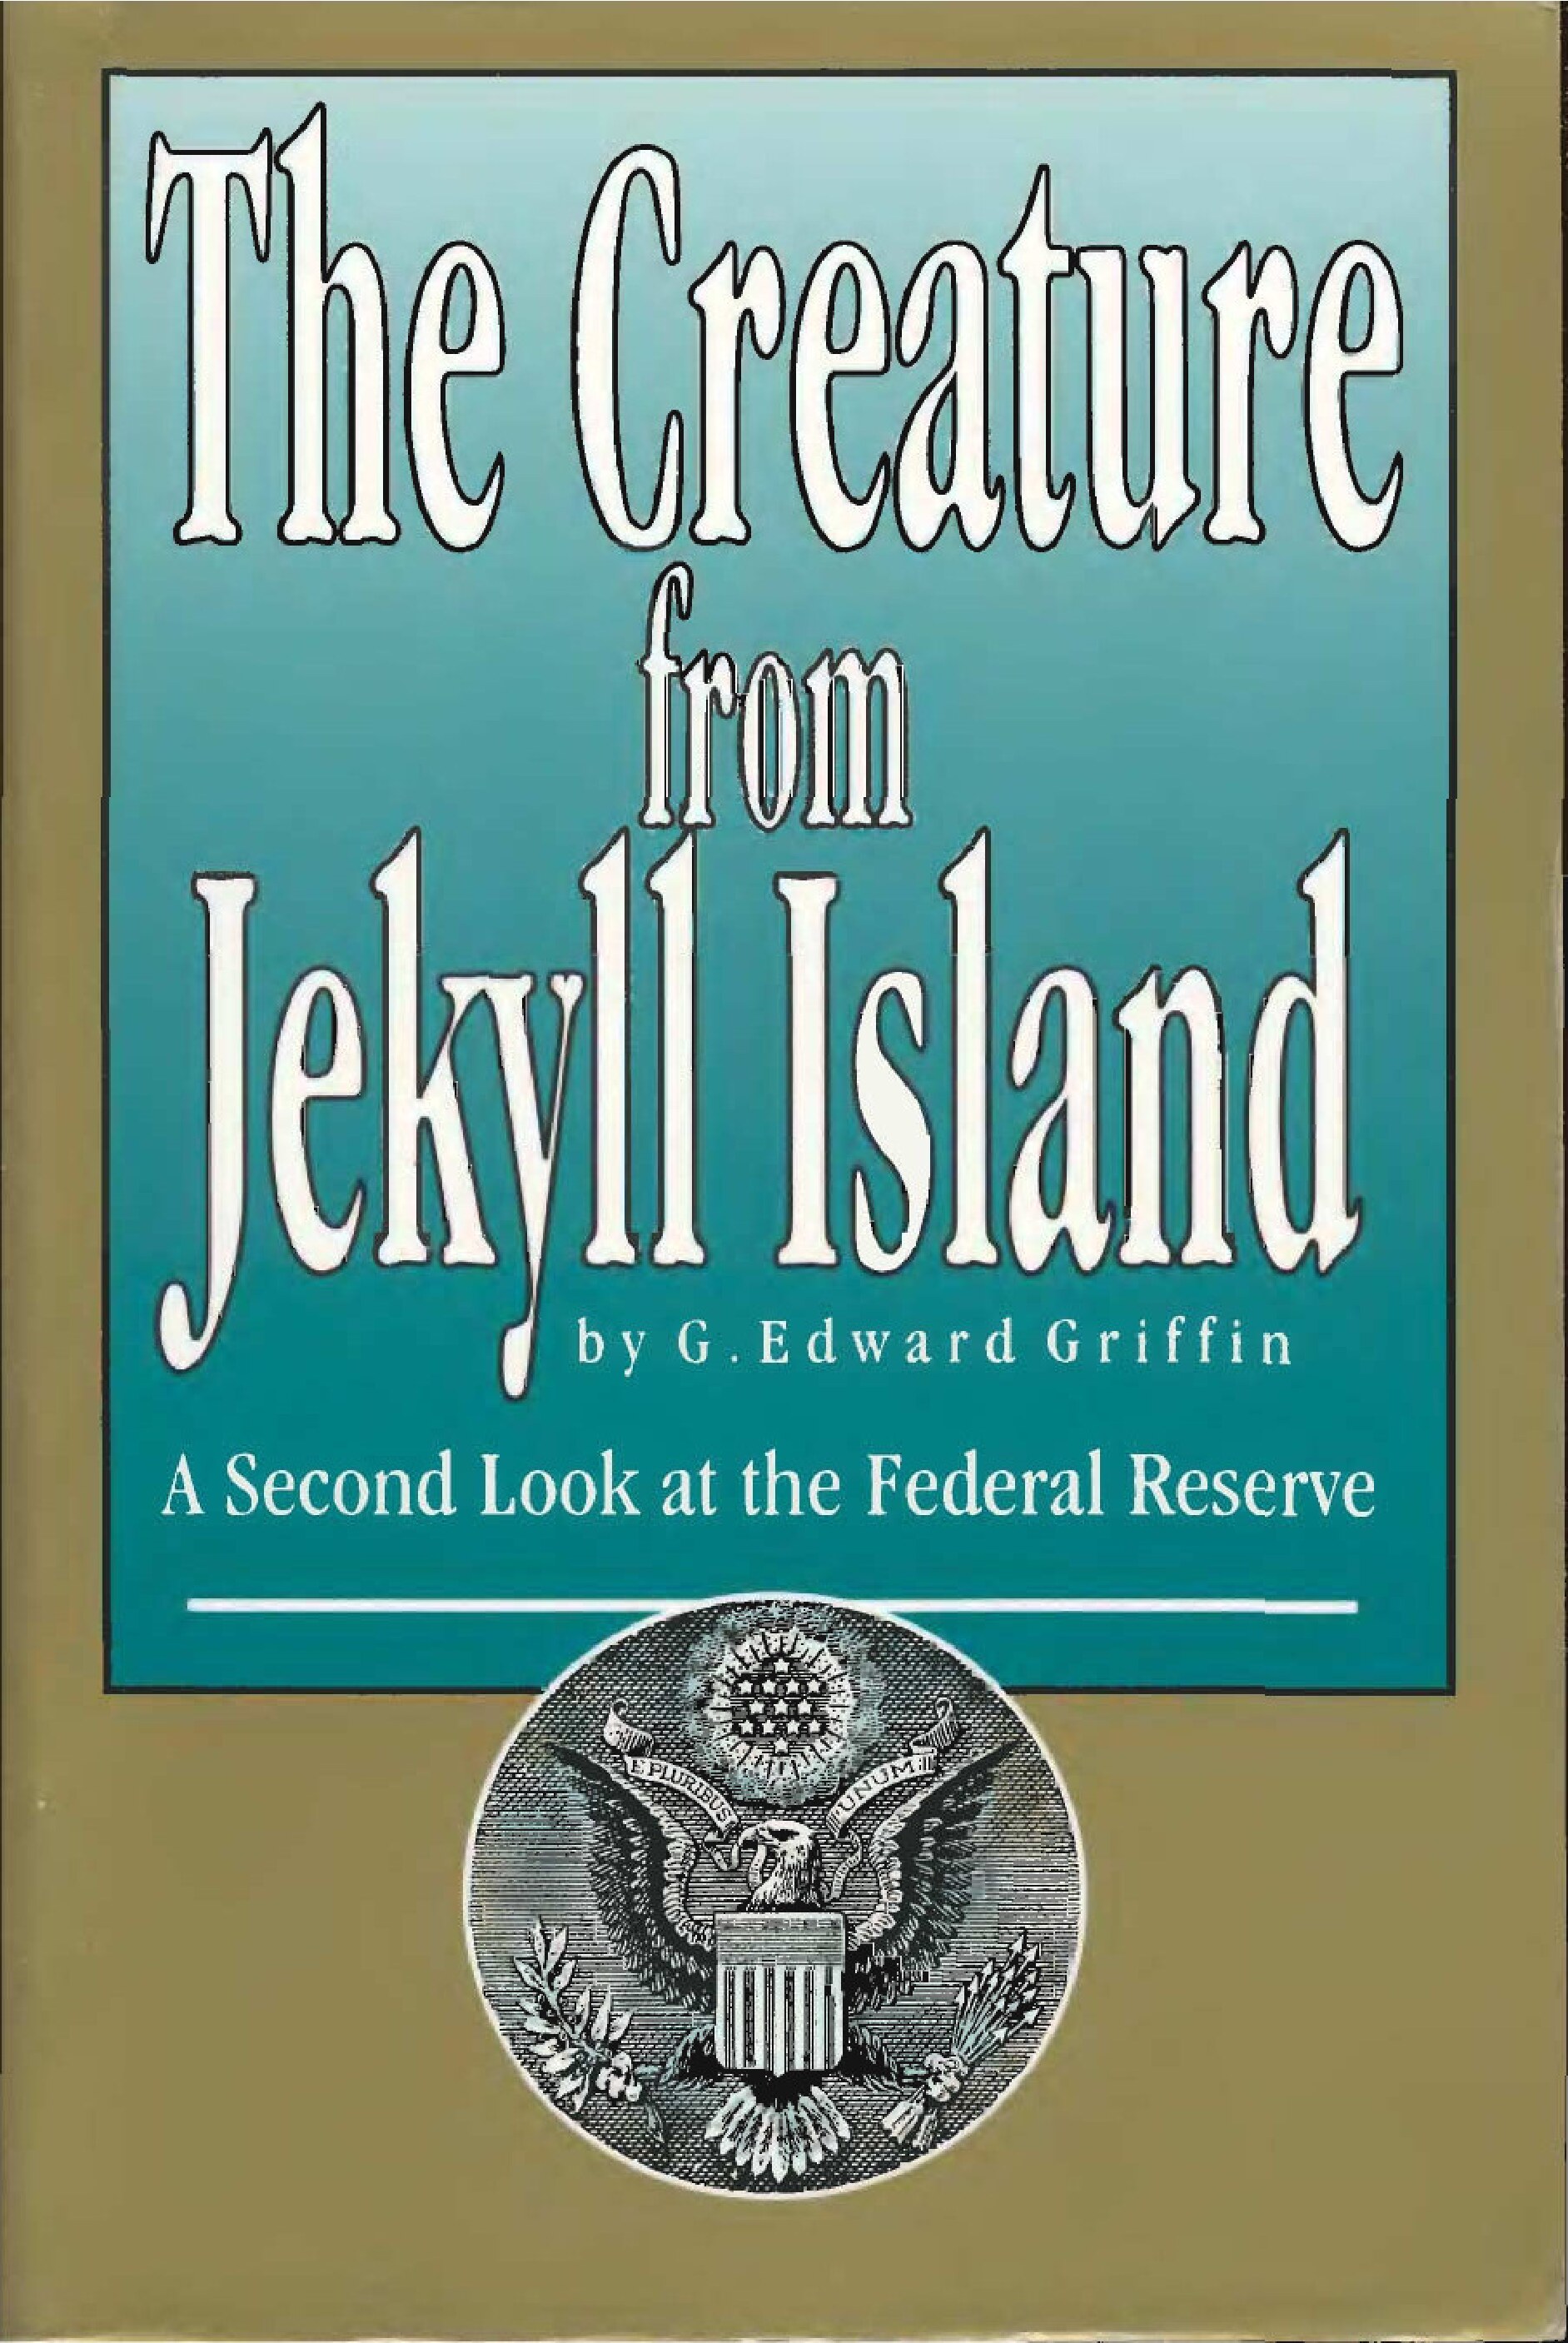 Griffin, G. Edward; Creature from Jekyll Island, The